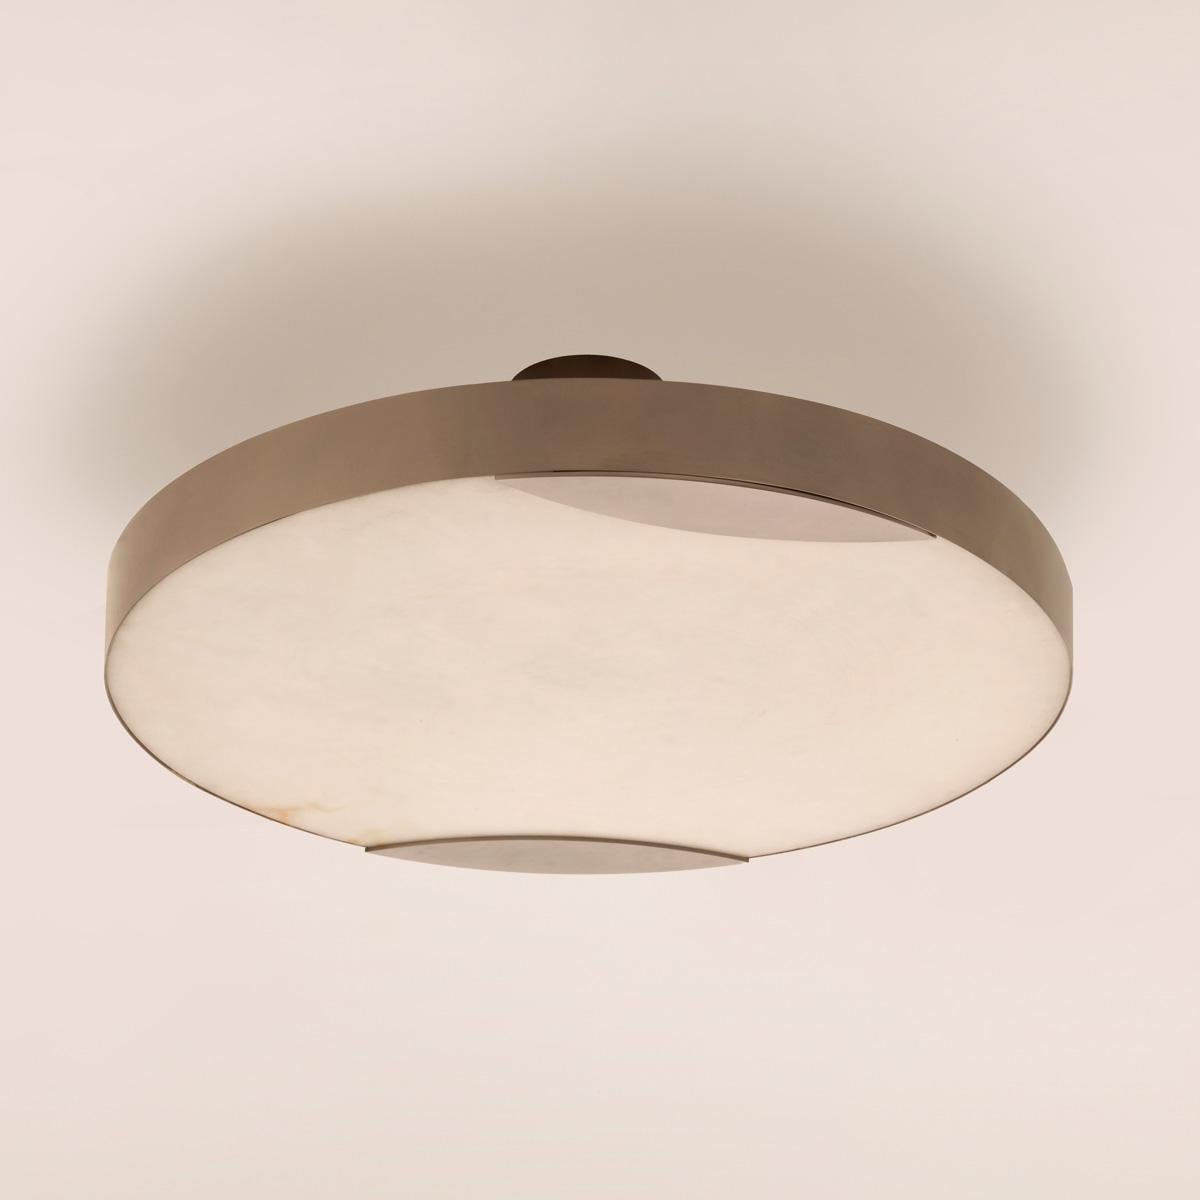 Italian Cloud N.1 Ceiling Light by Gaspare Asaro-Polished Brass Finish For Sale